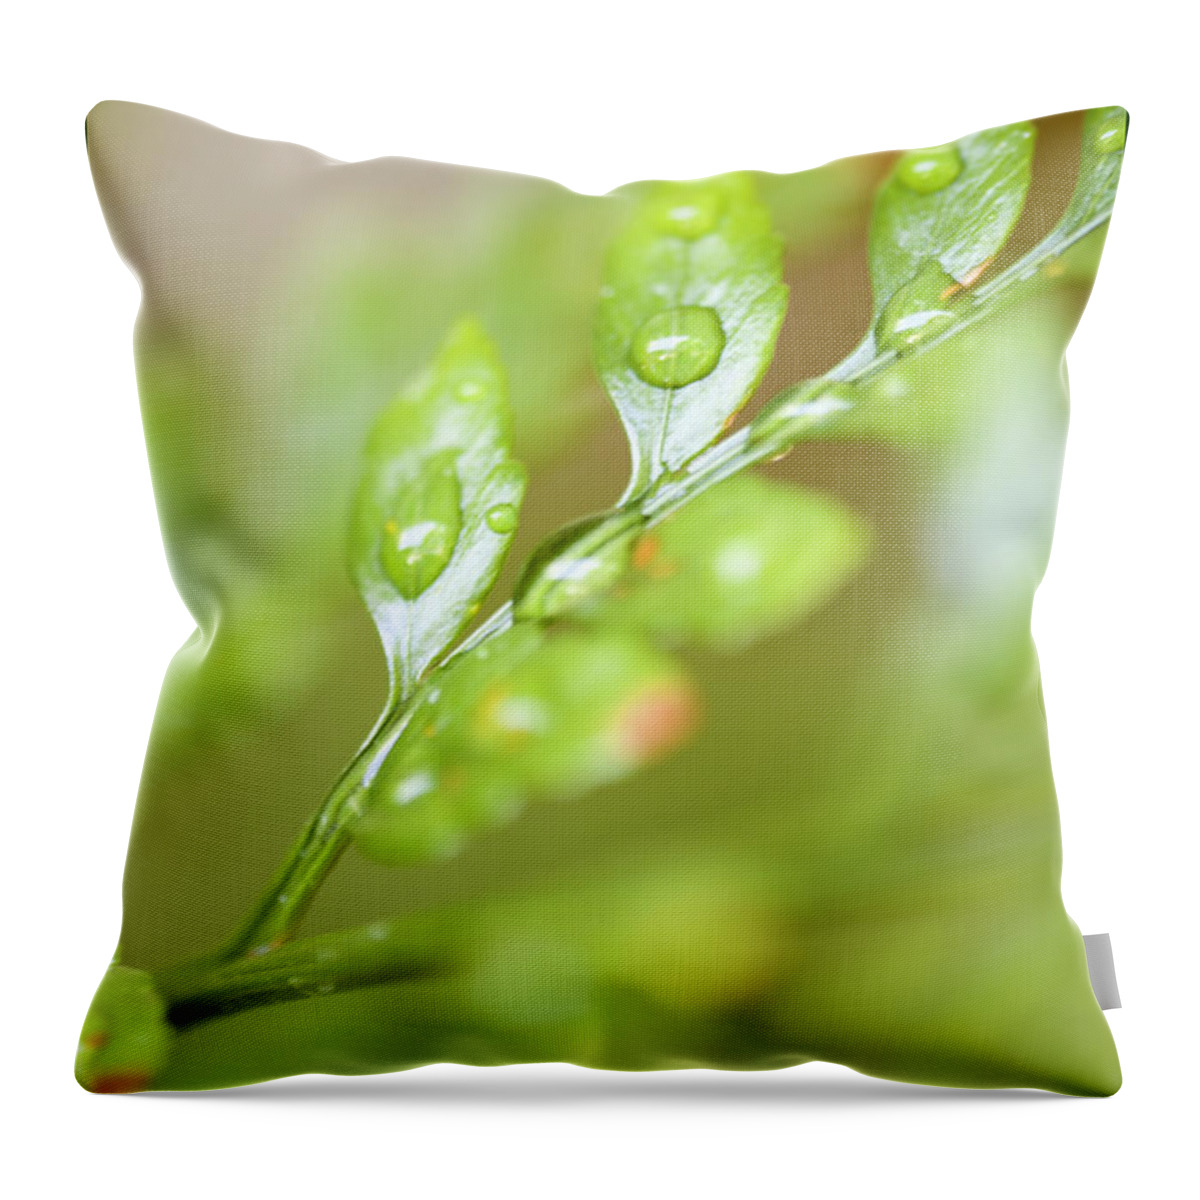 Close-up Throw Pillow featuring the photograph Fern Fronds by Richard J Thompson 